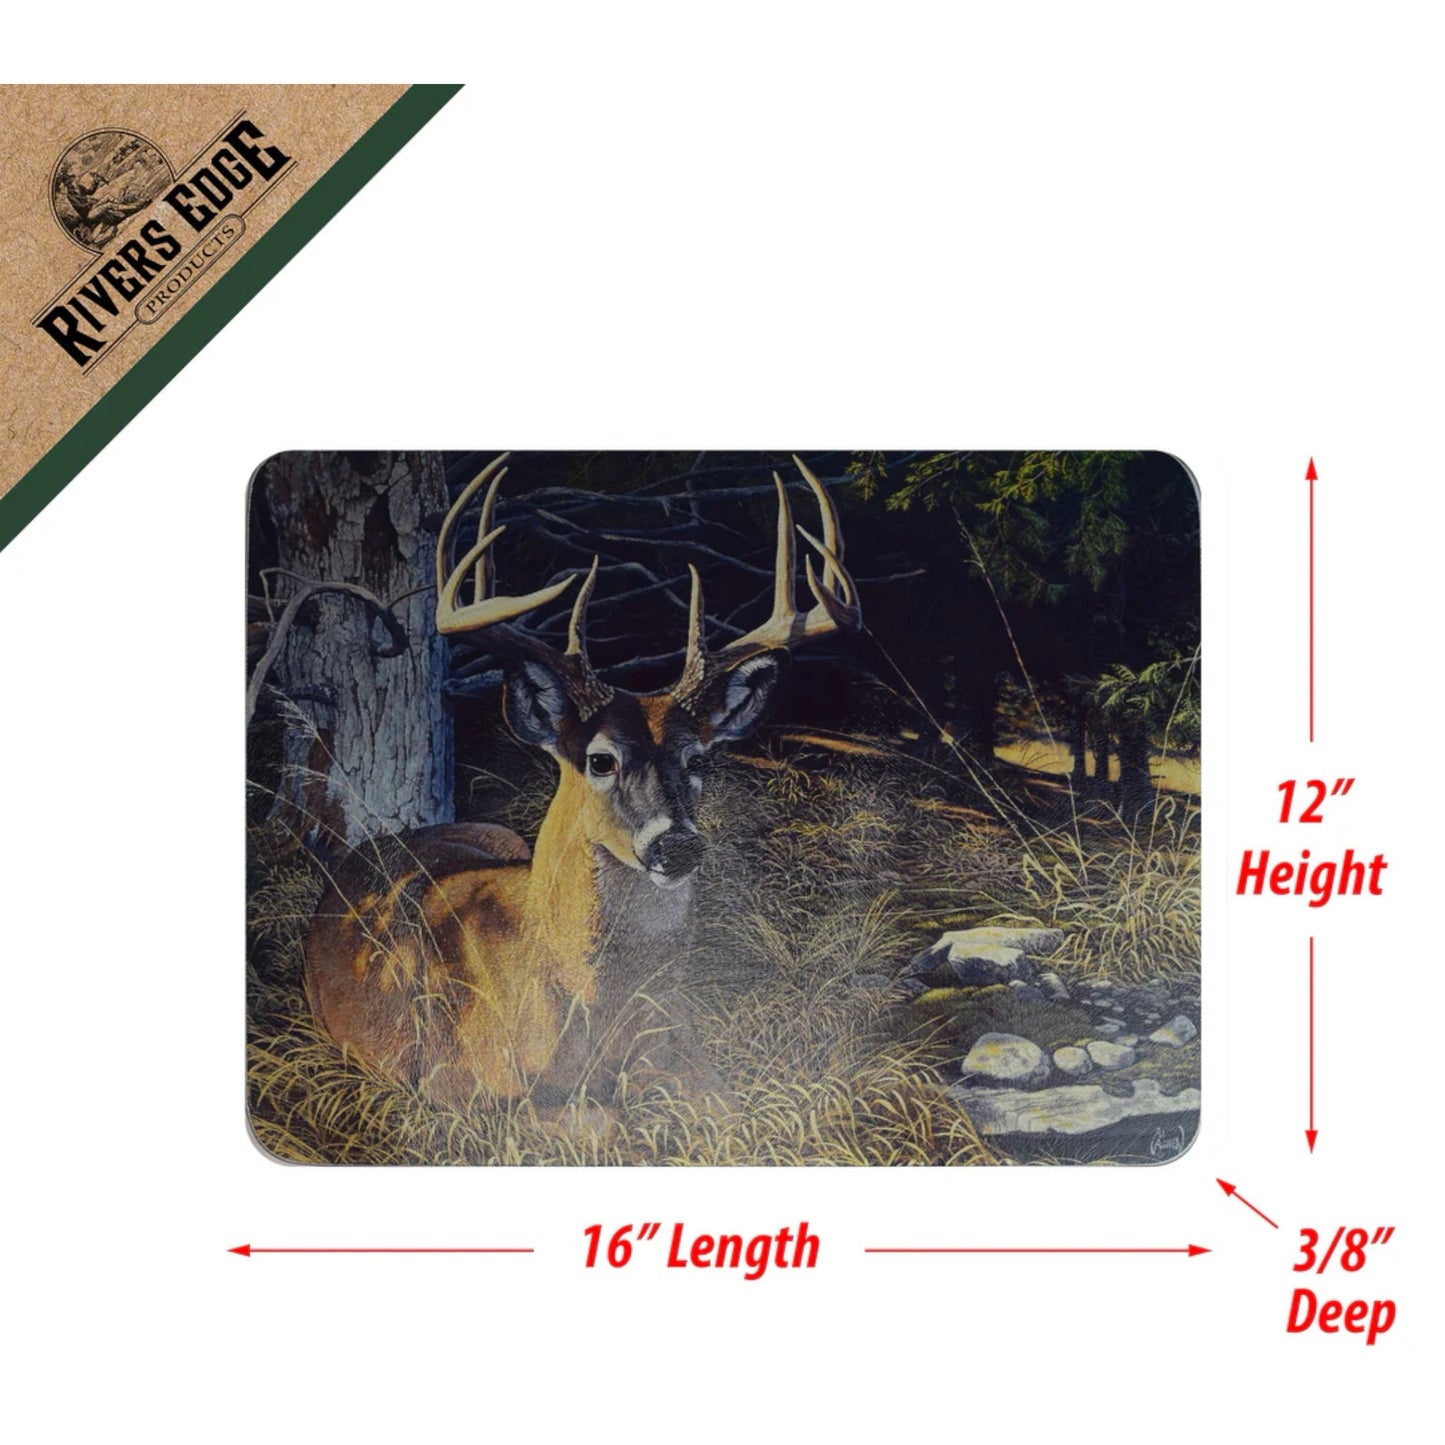 Tempered Glass Cutting Board - Whitetail Deer